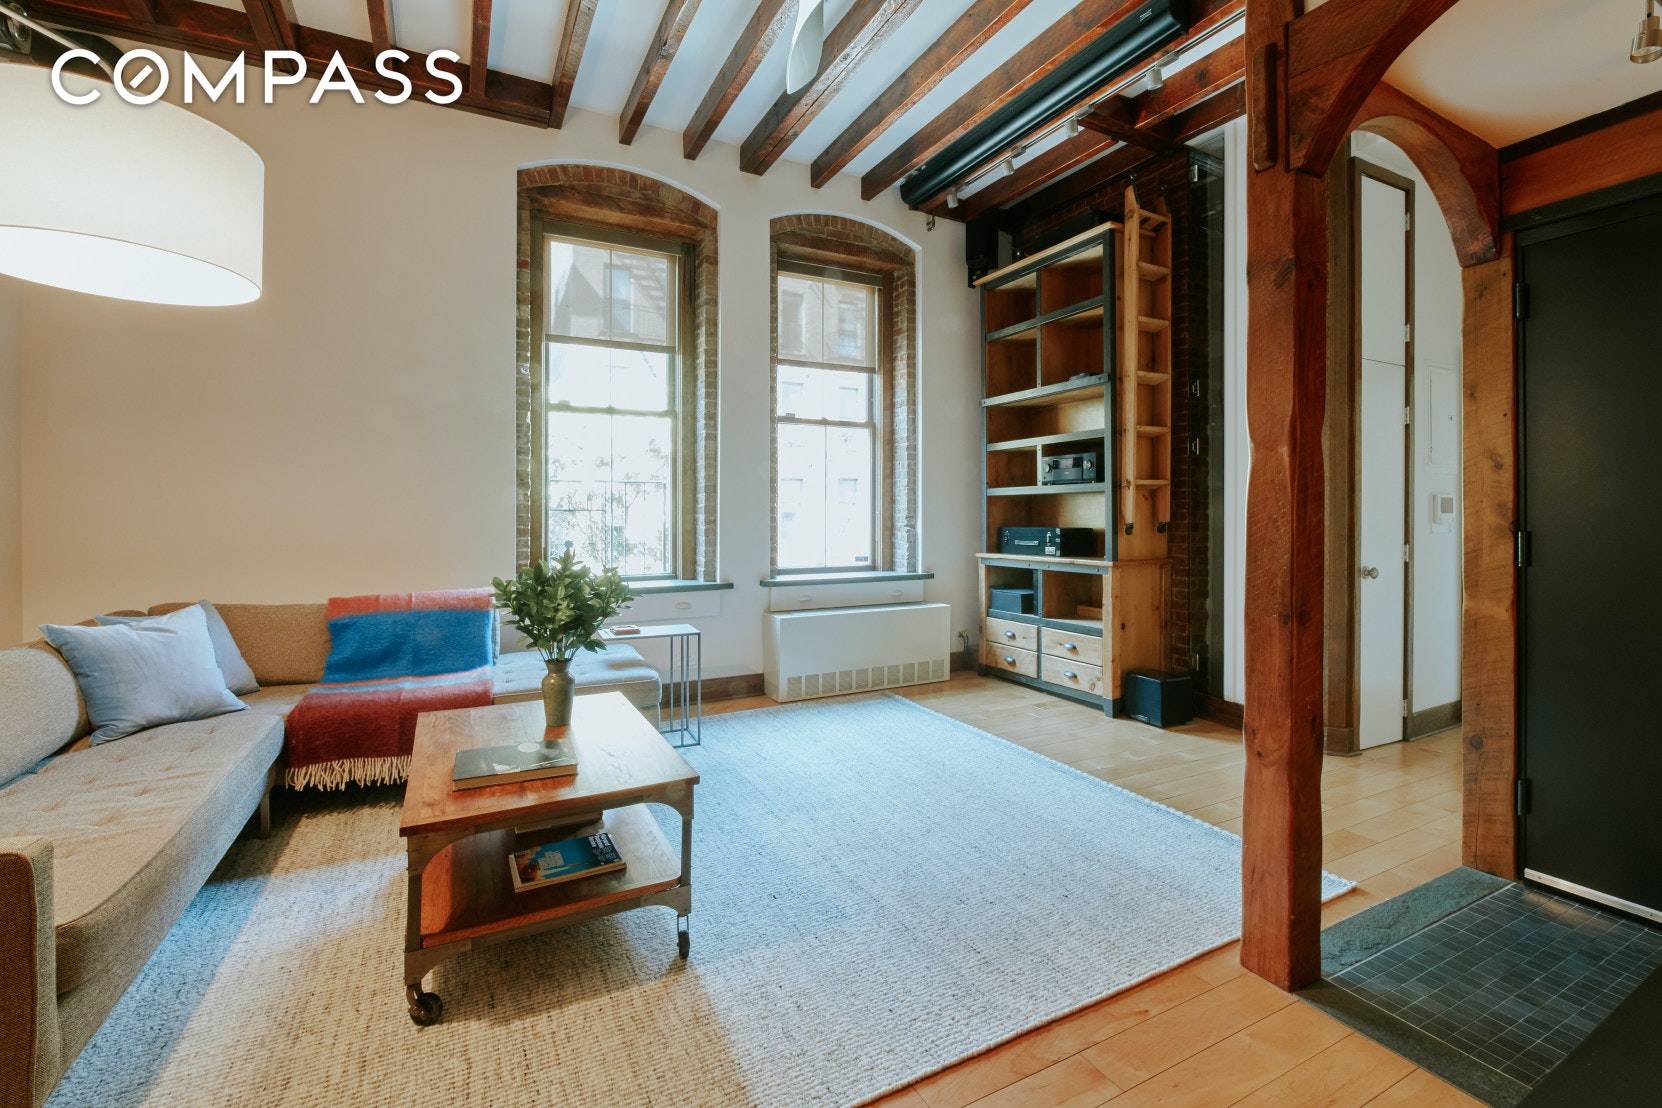 Over 500 sqft of private roof garden Charming and Thoughtfully Renovated 3 Bedroom, 3 Bath Pre War Home exudes tranquility and serves as an incredible oasis from the busy city.